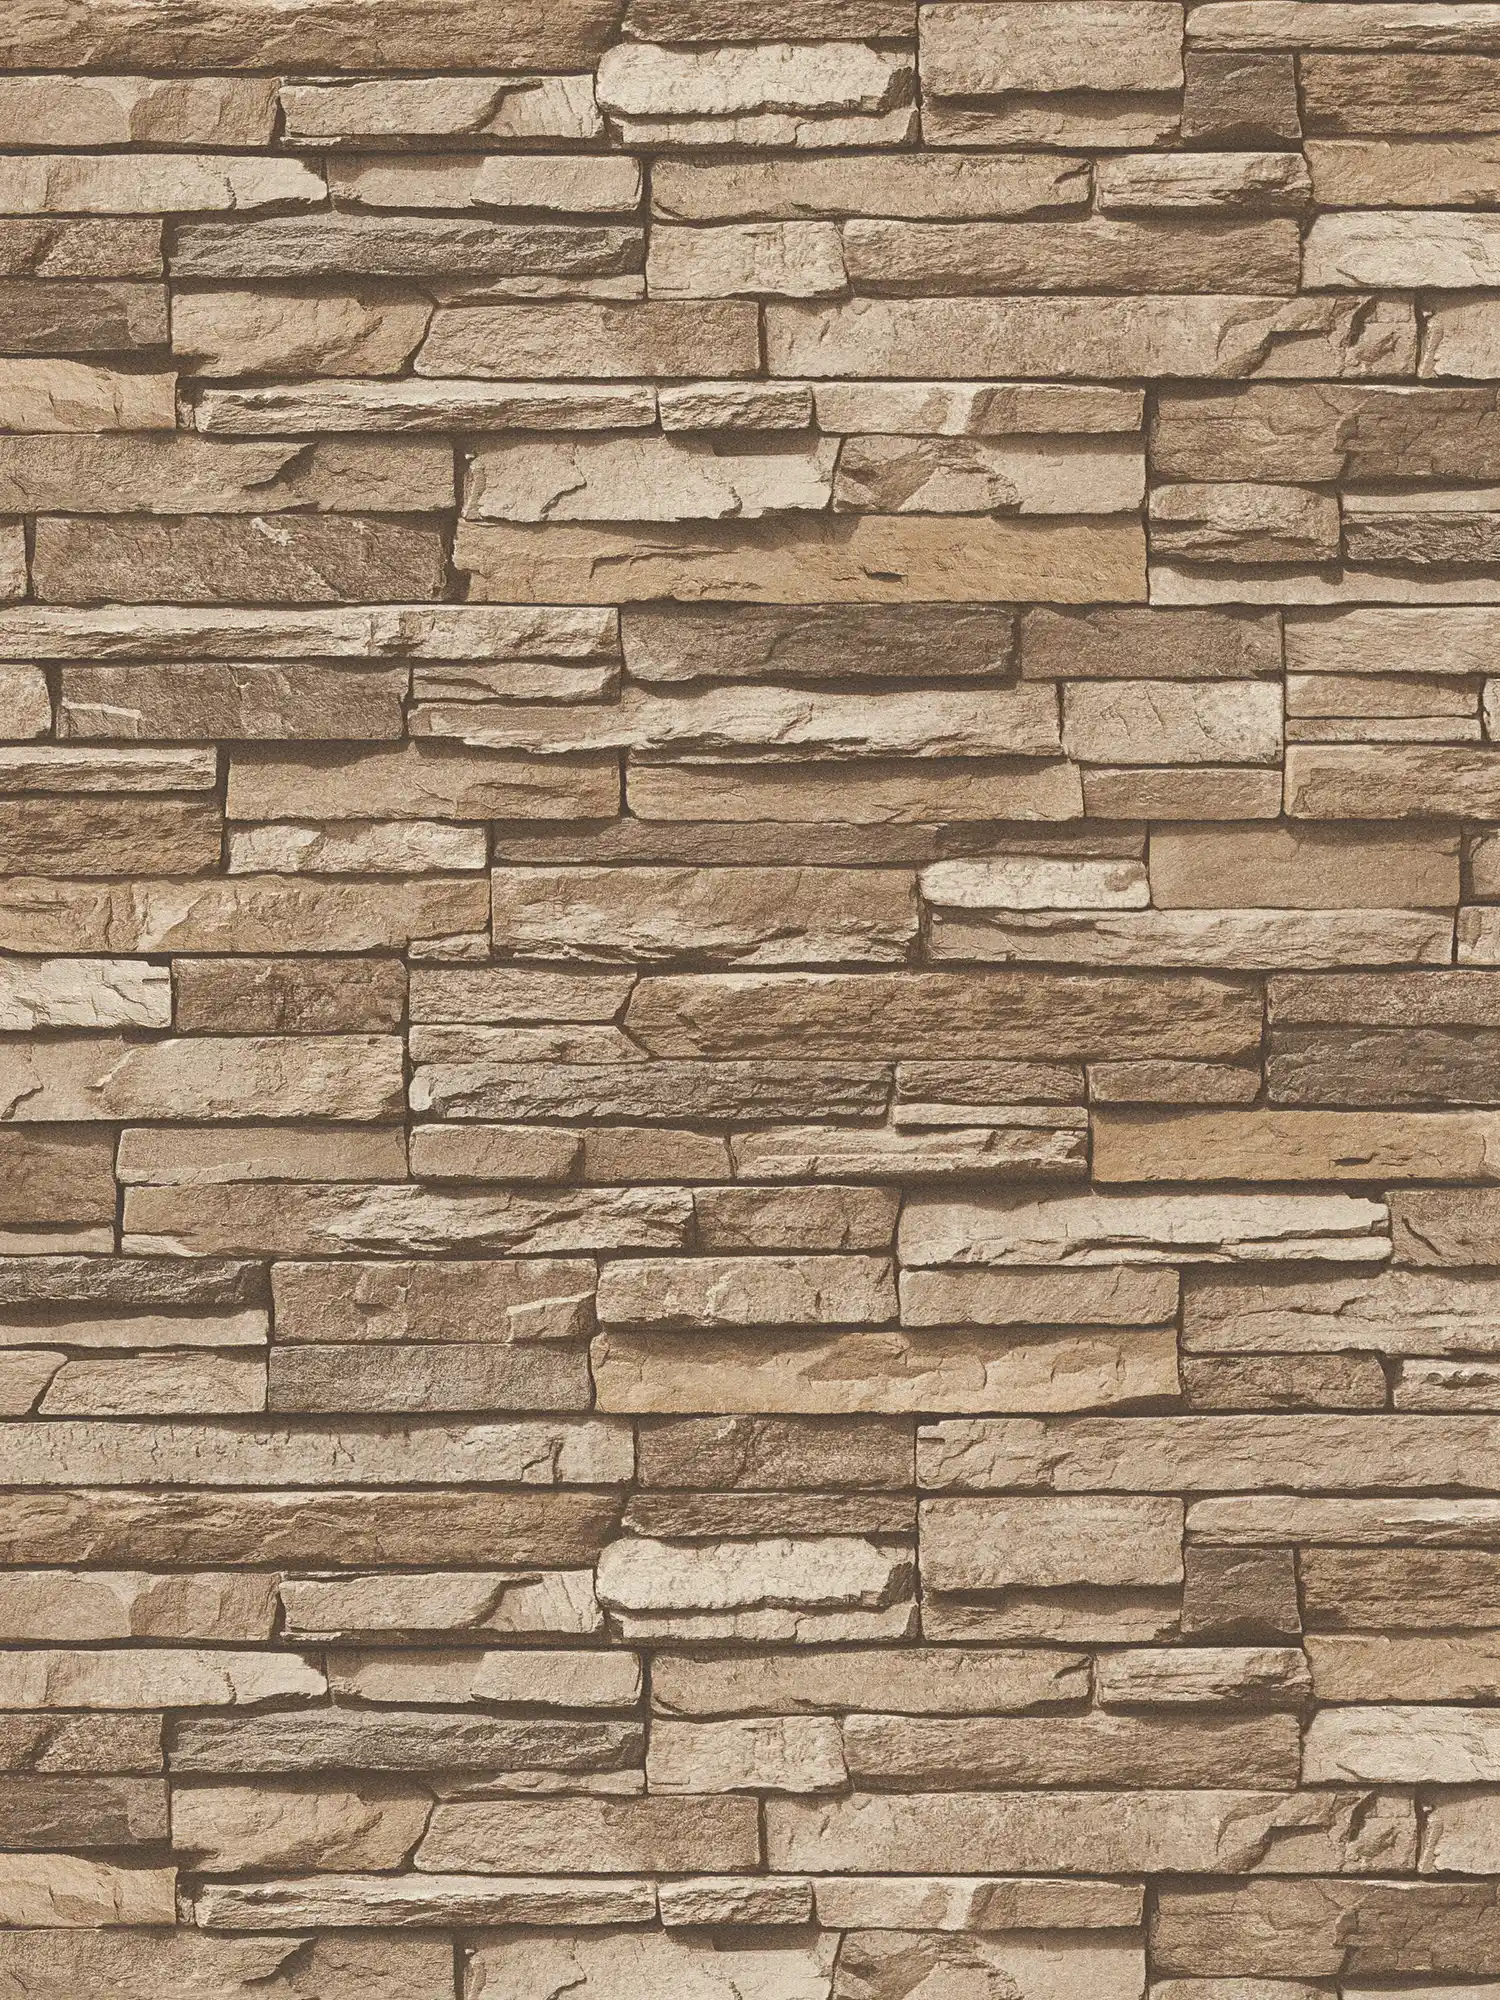         Wallpaper with stone wall pattern & 3D look - brown, beige
    